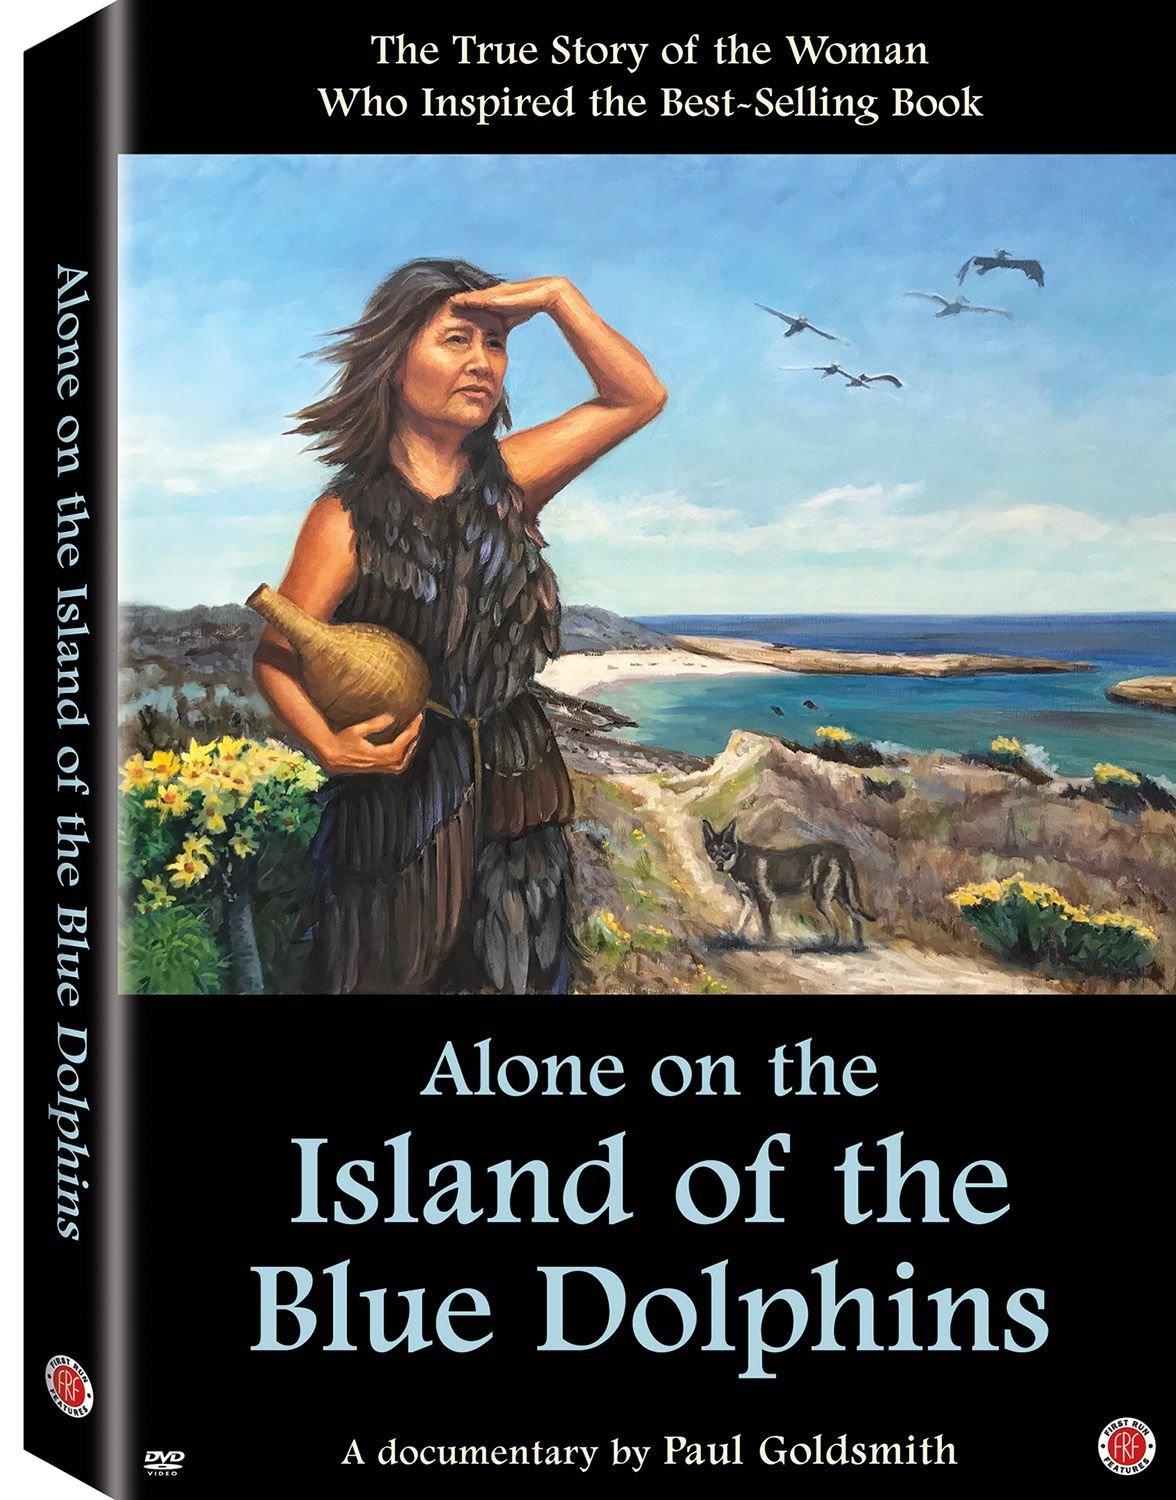 Alone on the Island of the Blue Dolphins